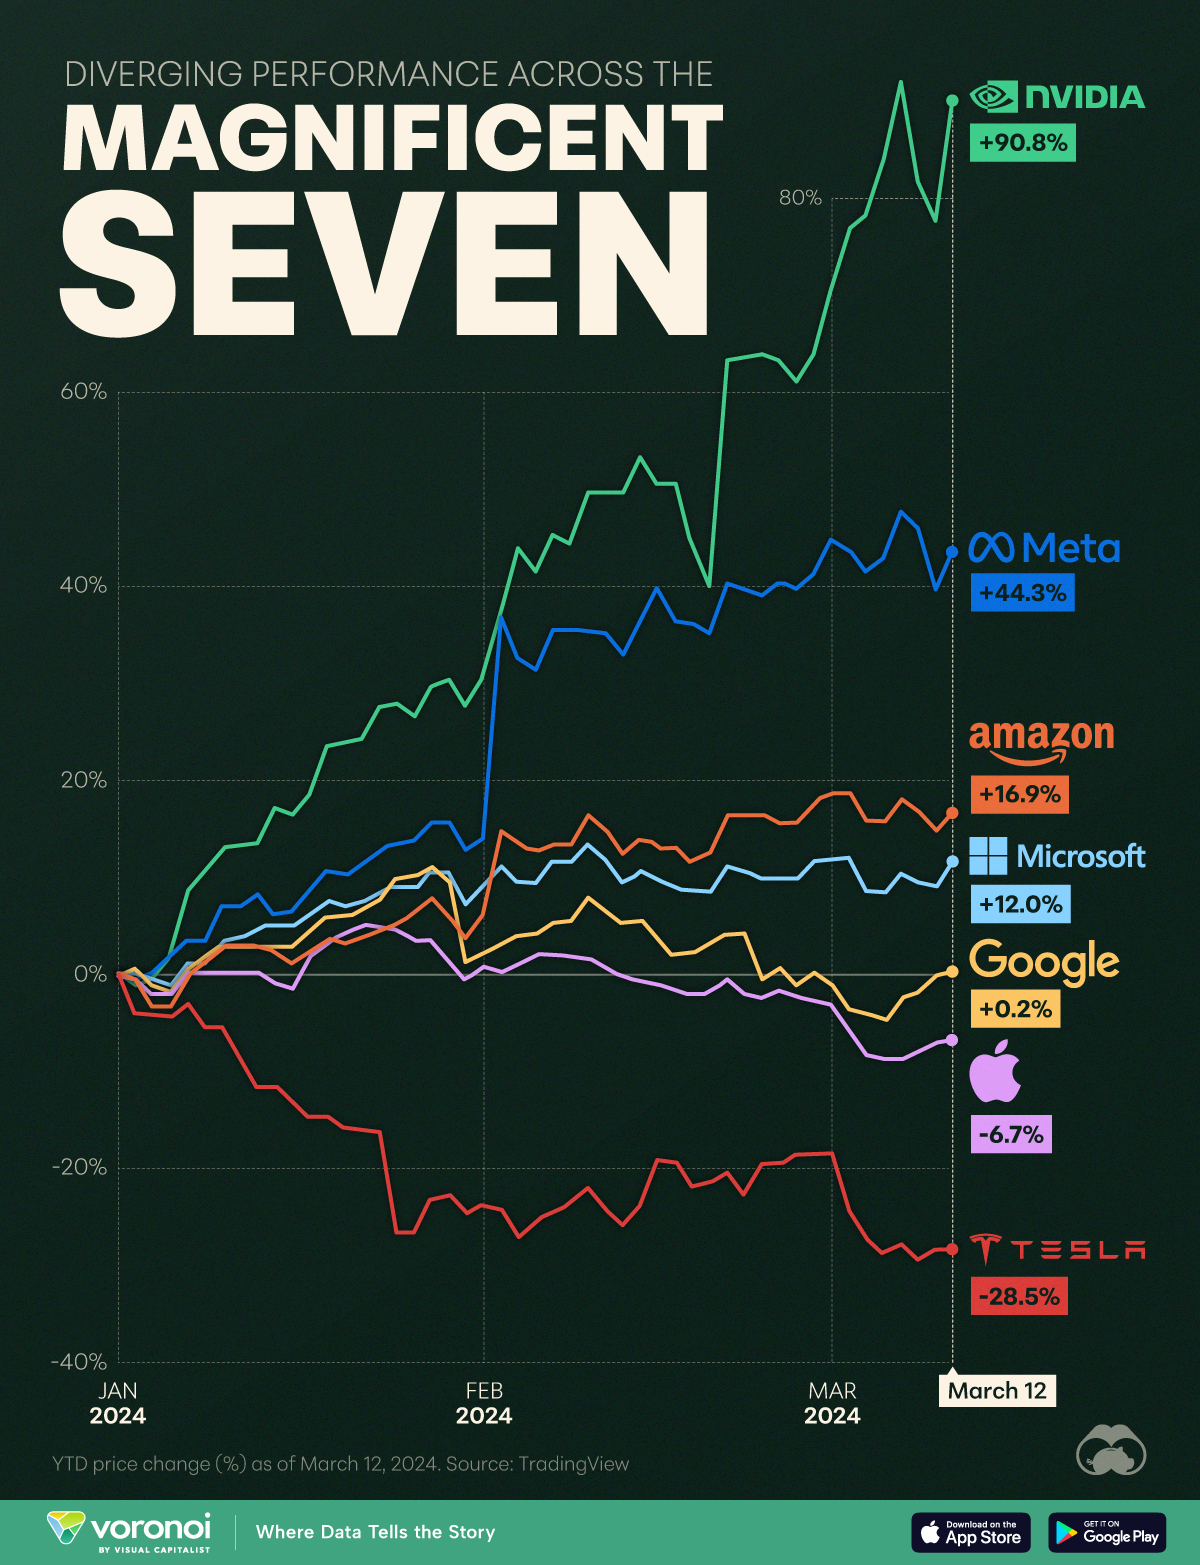 Chart showing the YTD performance of the Magnificent Seven stocks